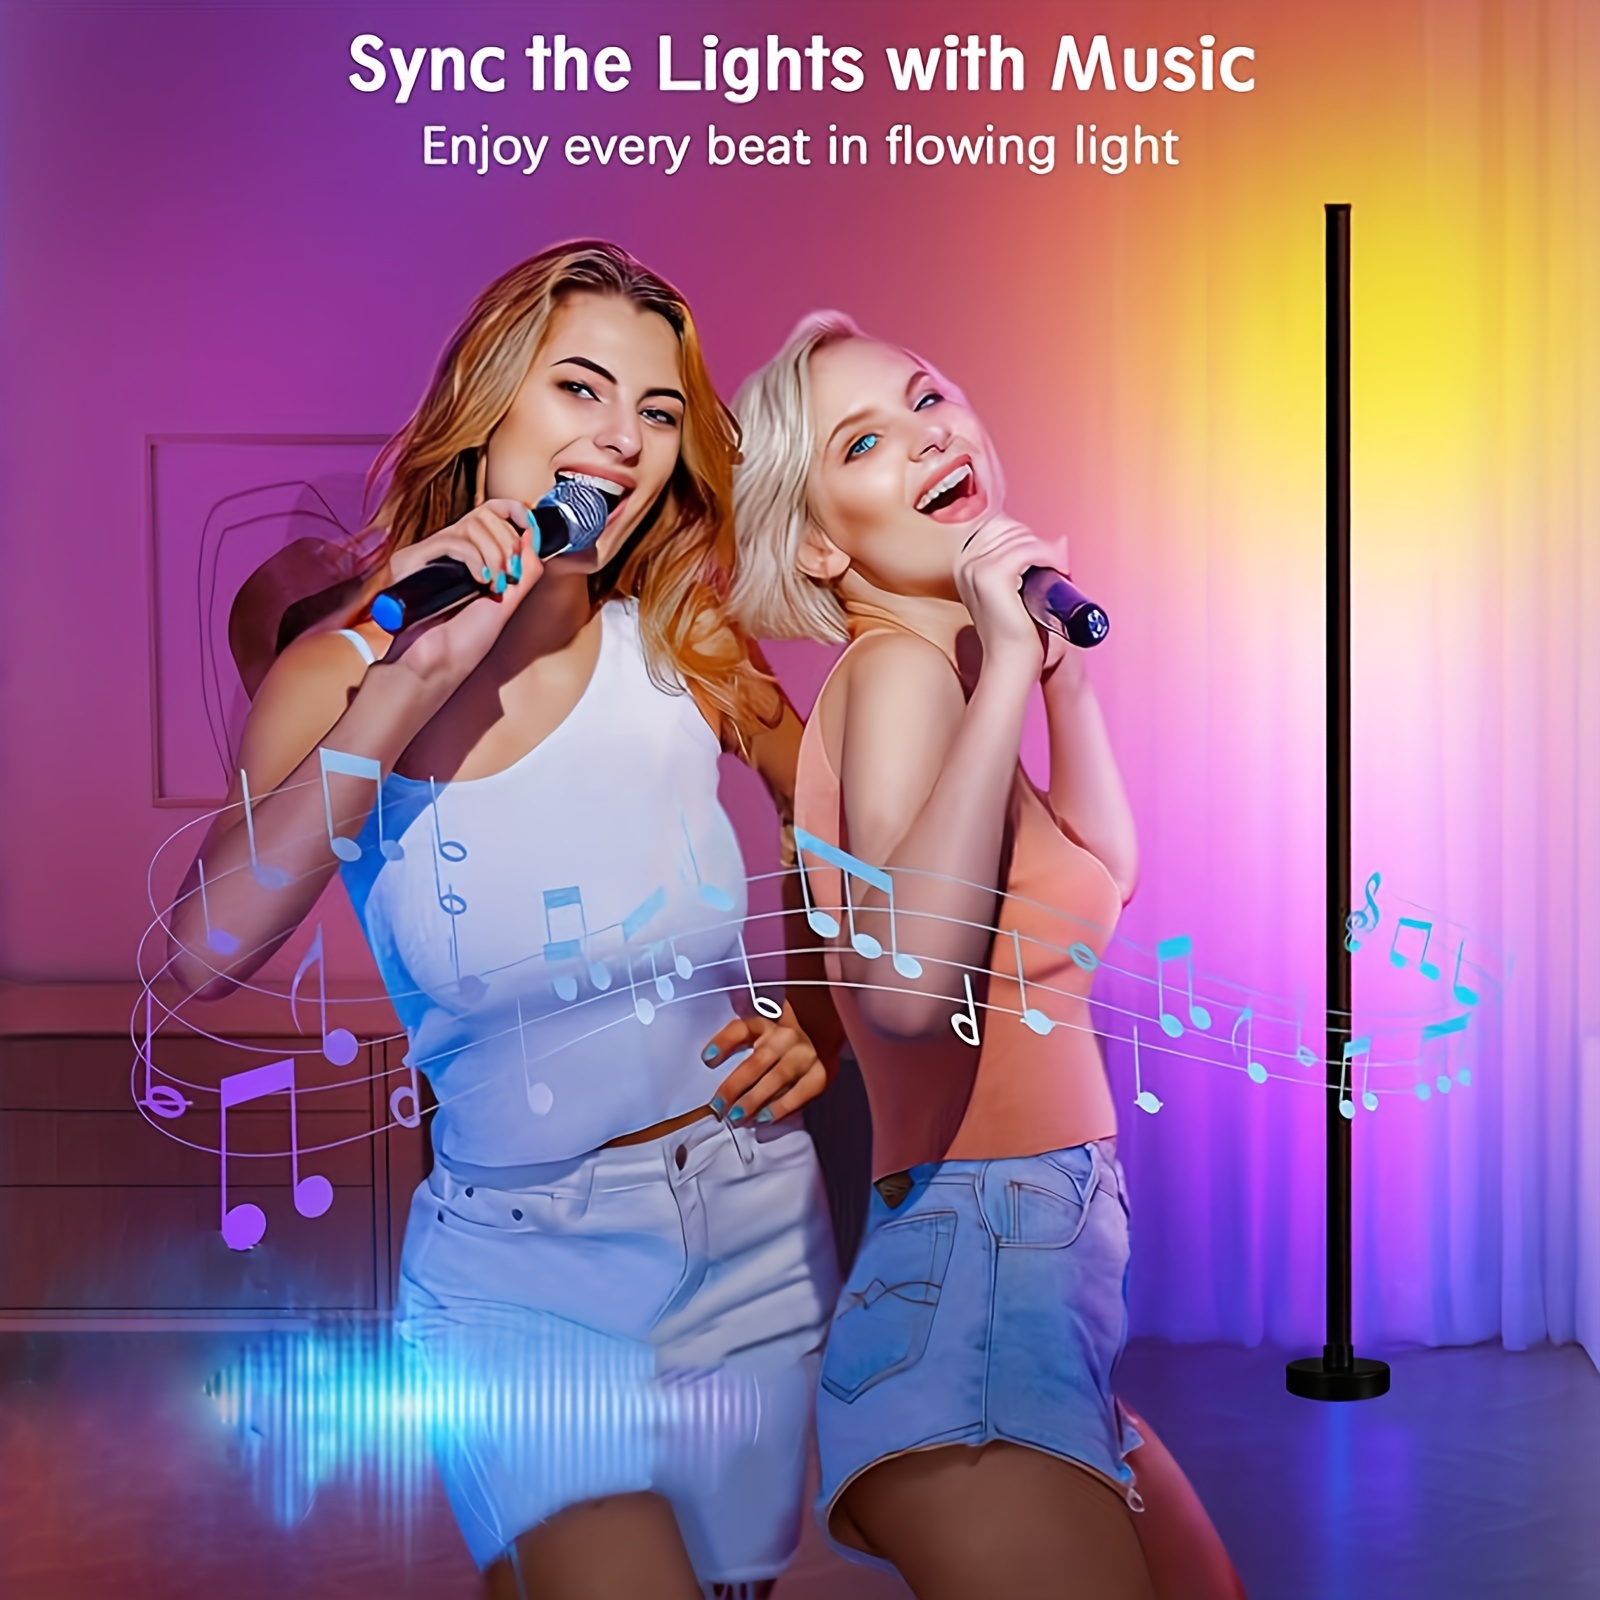 1pc 2pcs led smart floor lamp rgb dimmable pastel light with music function and timer usb lamp can be connected with remote control suitable for bedroom living room game room decorative atmosphere lighting can increase quality of life eid al adha mubarak details 2